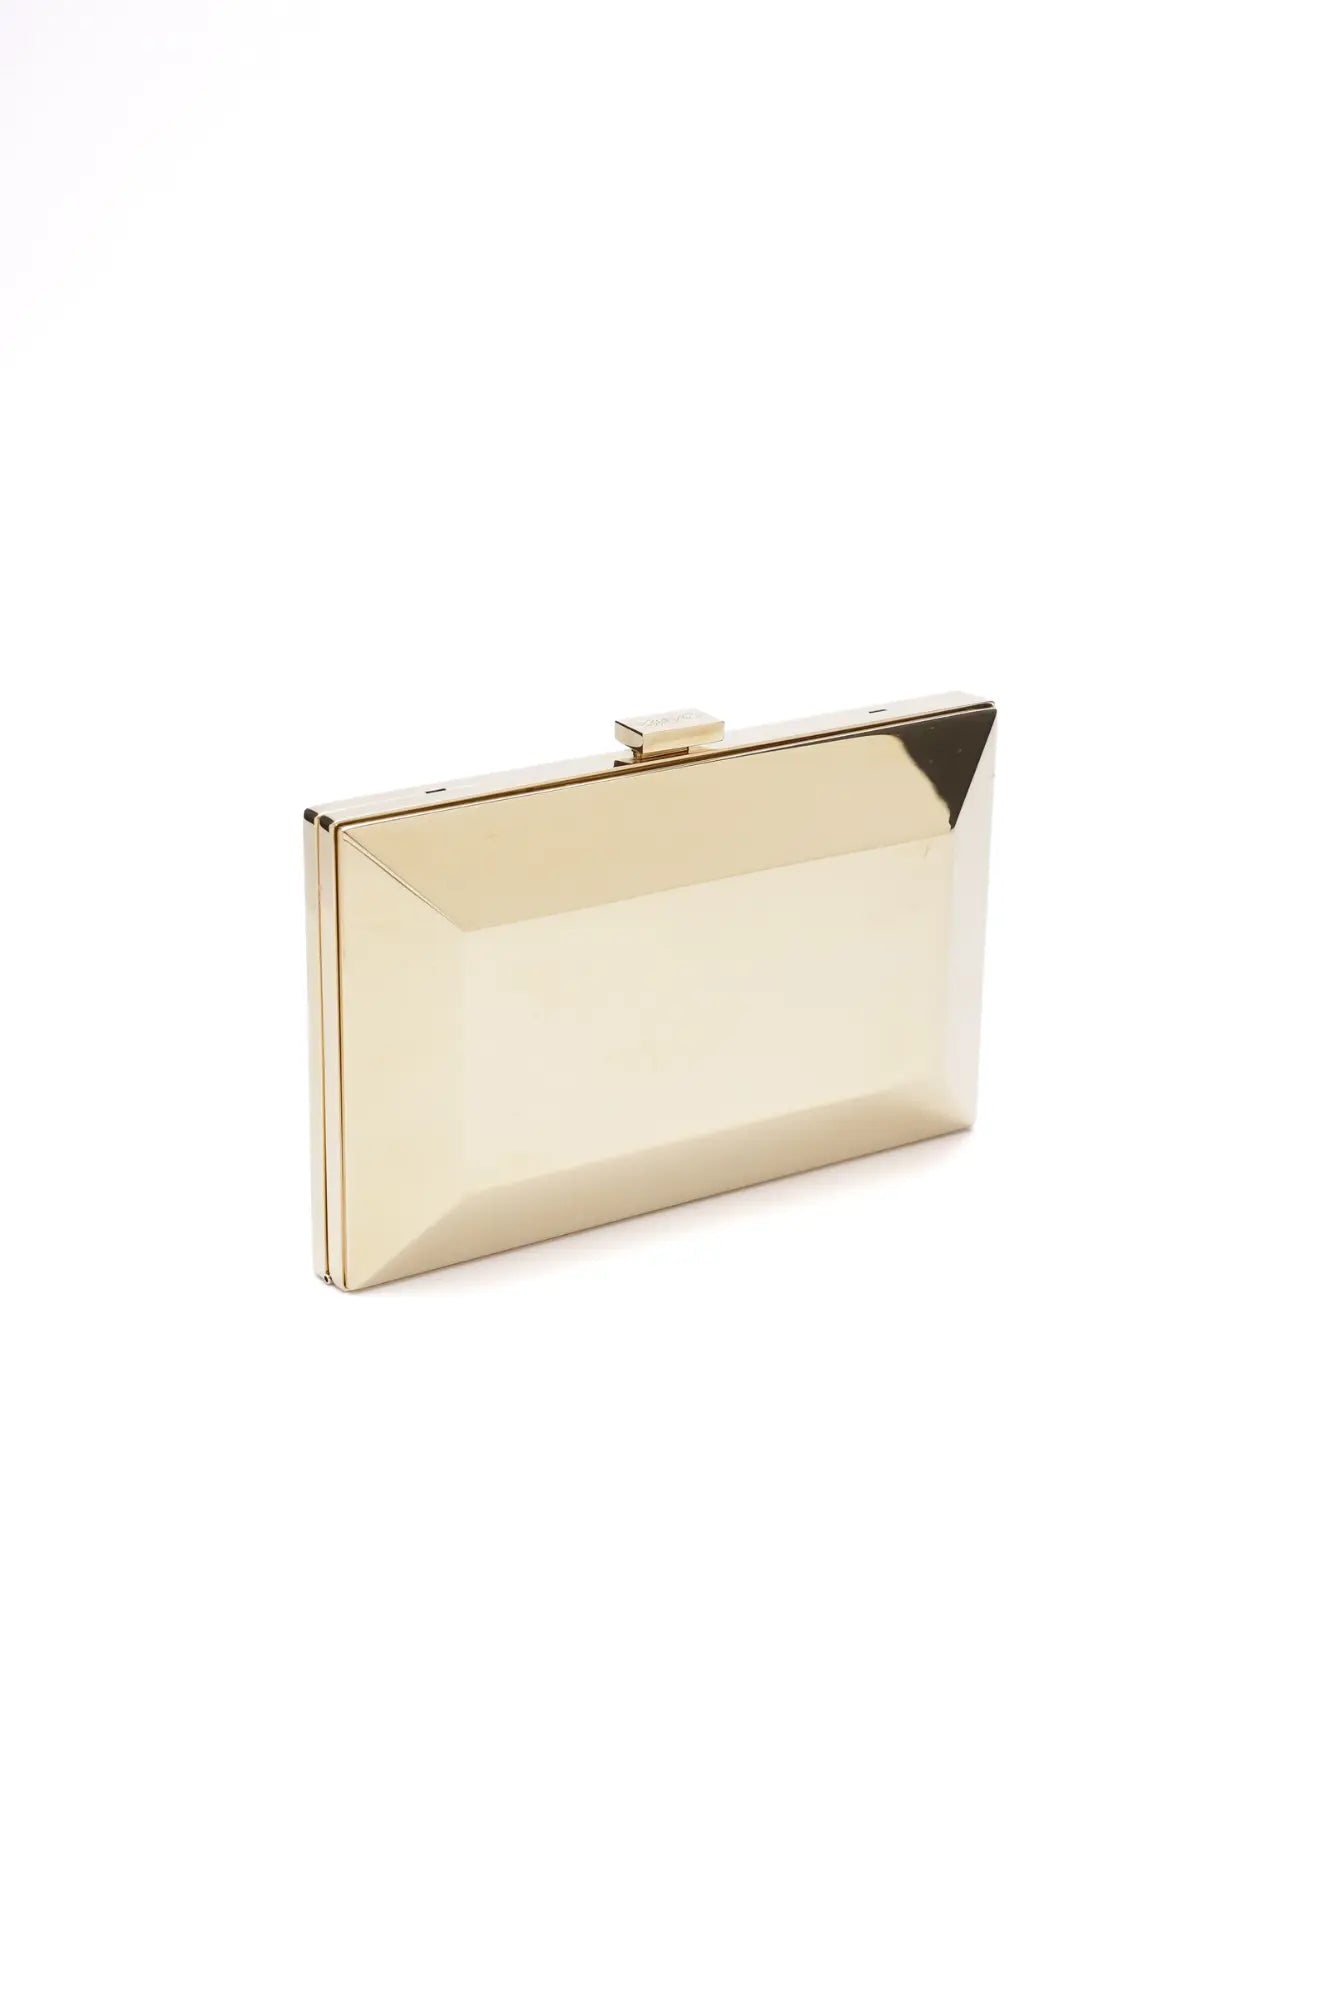 MICAELA - Gold Metallic clutch purse from The Bella Rosa Collection showcasing Italian craftsmanship on a white background.